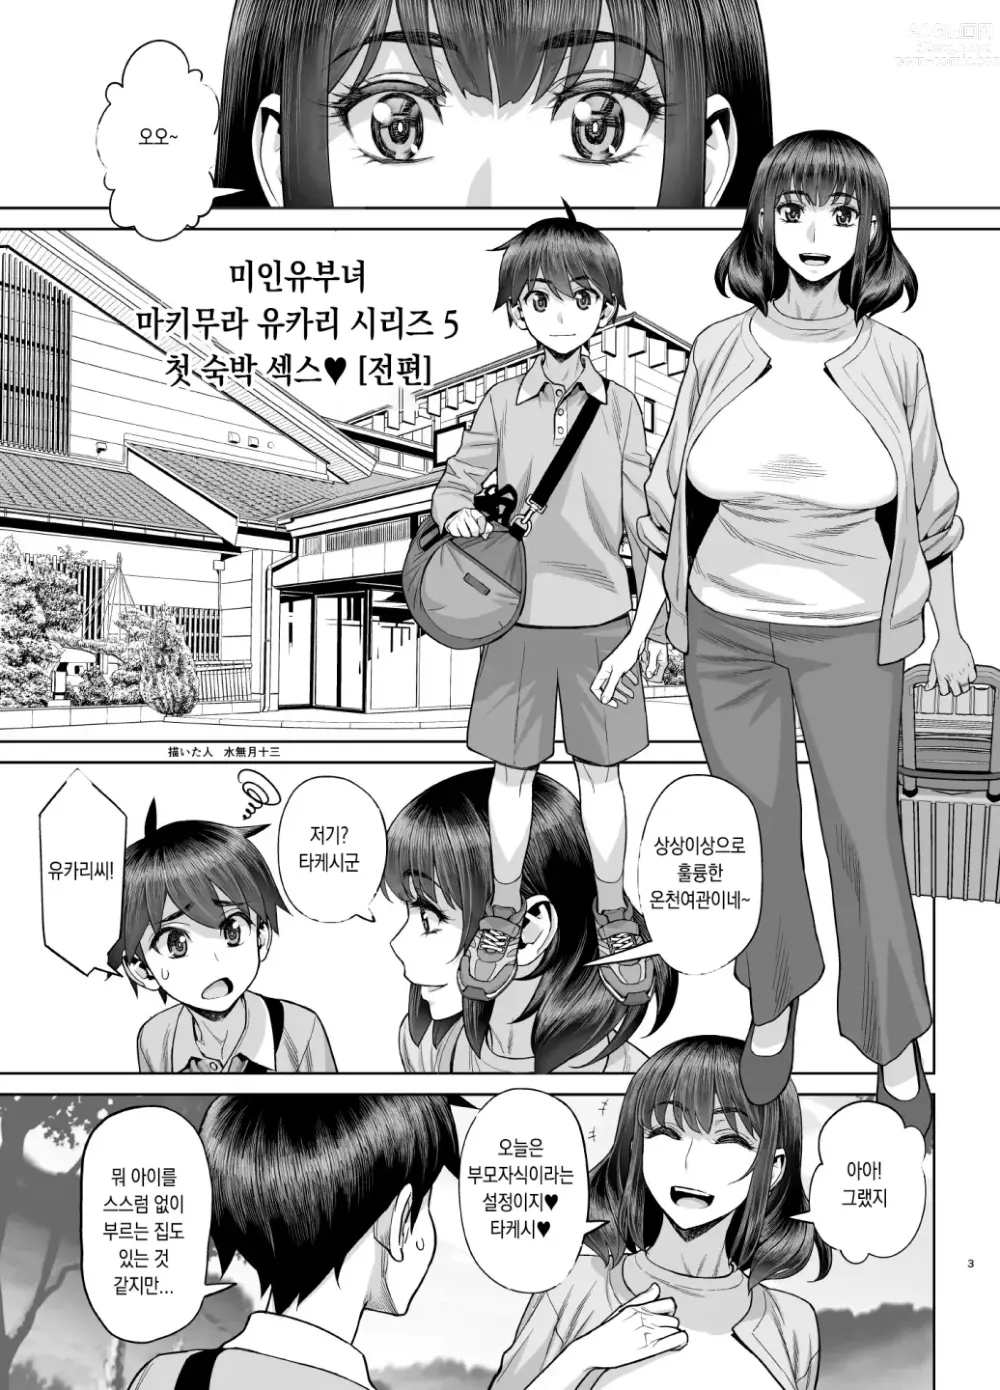 Page 3 of doujinshi 첫숙박 섹스